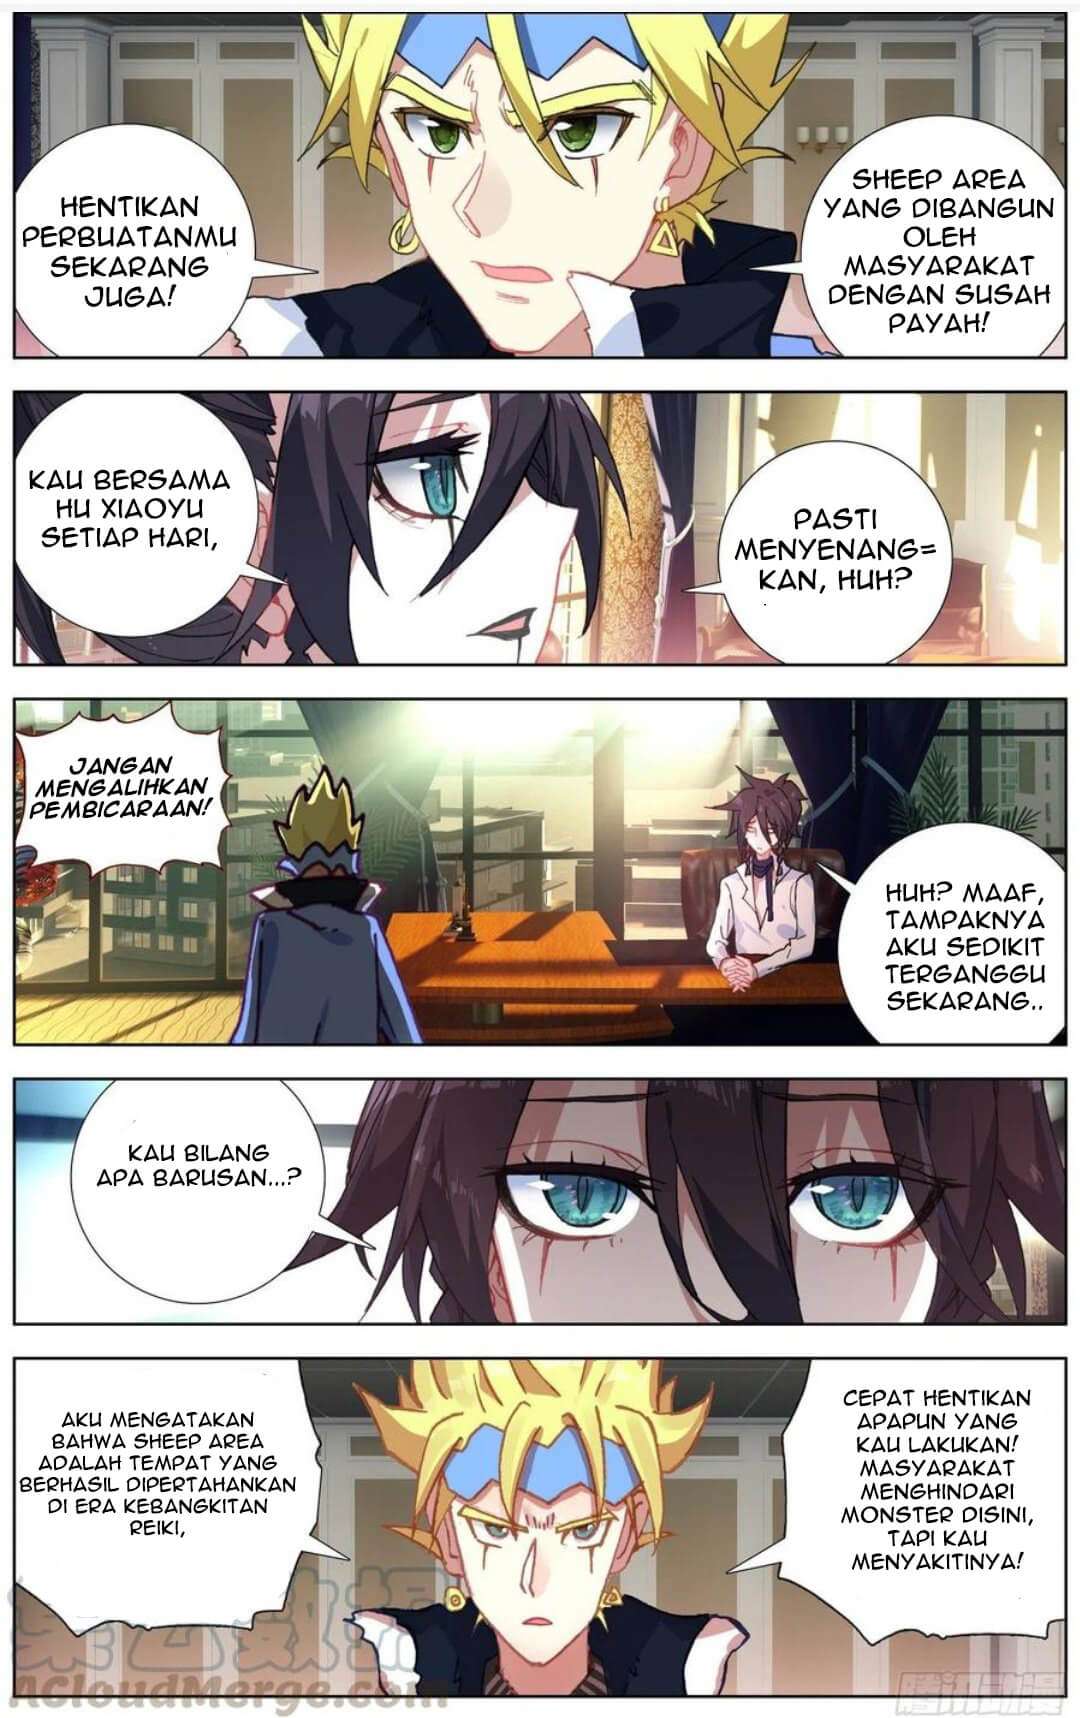 Different Kings Chapter 183 FIX